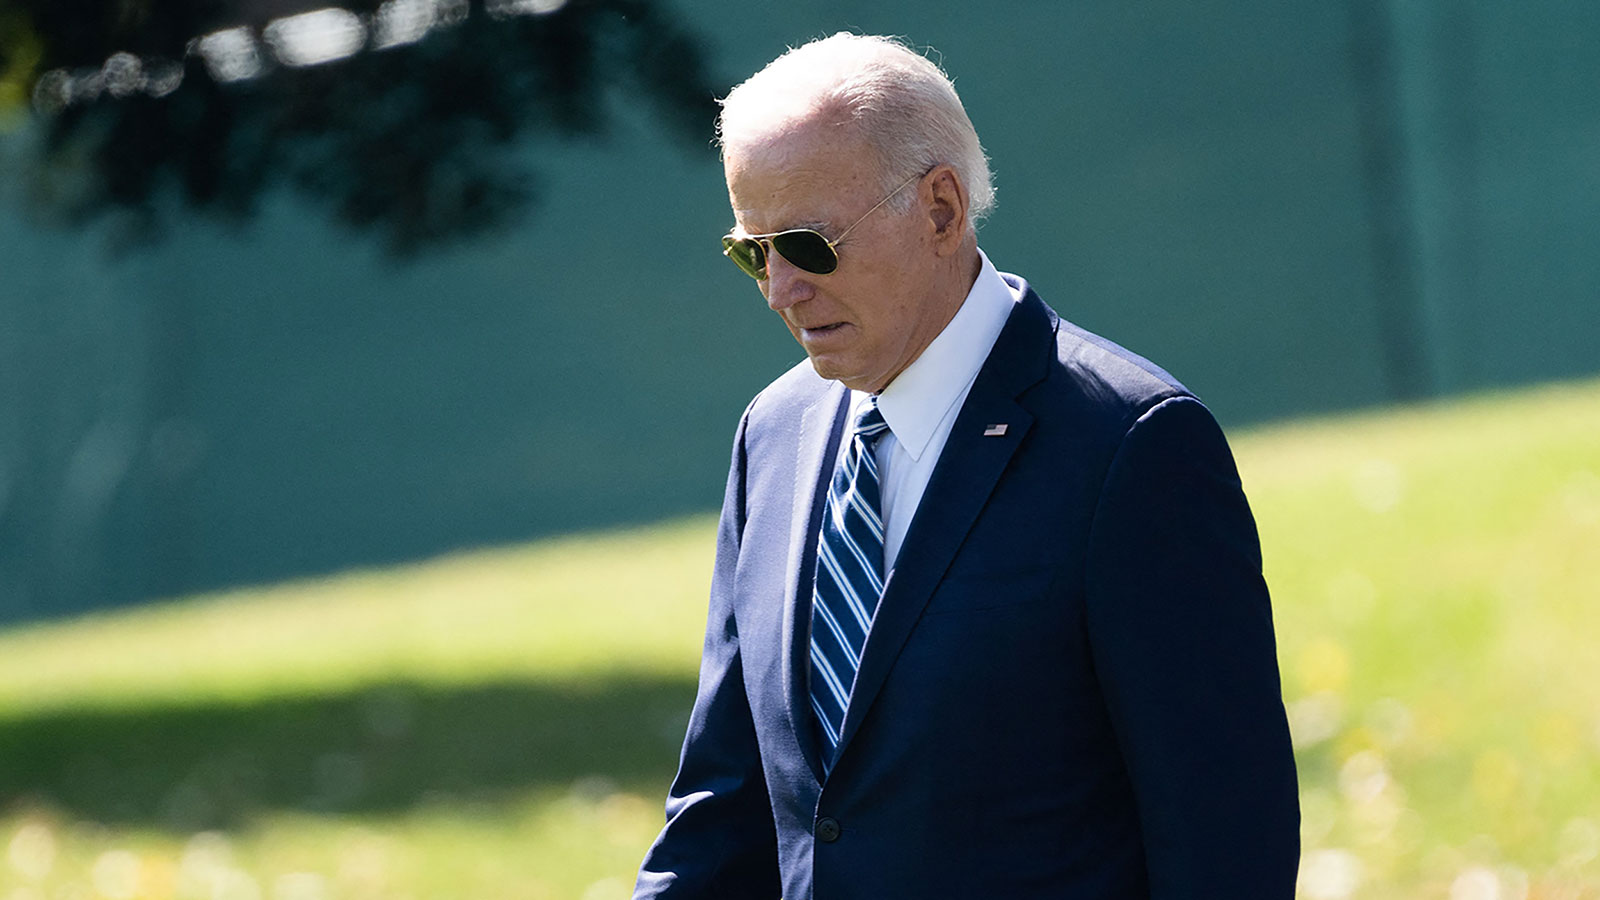 Biden walks to board Marine One from the South Lawn of the White House on Friday, October 13